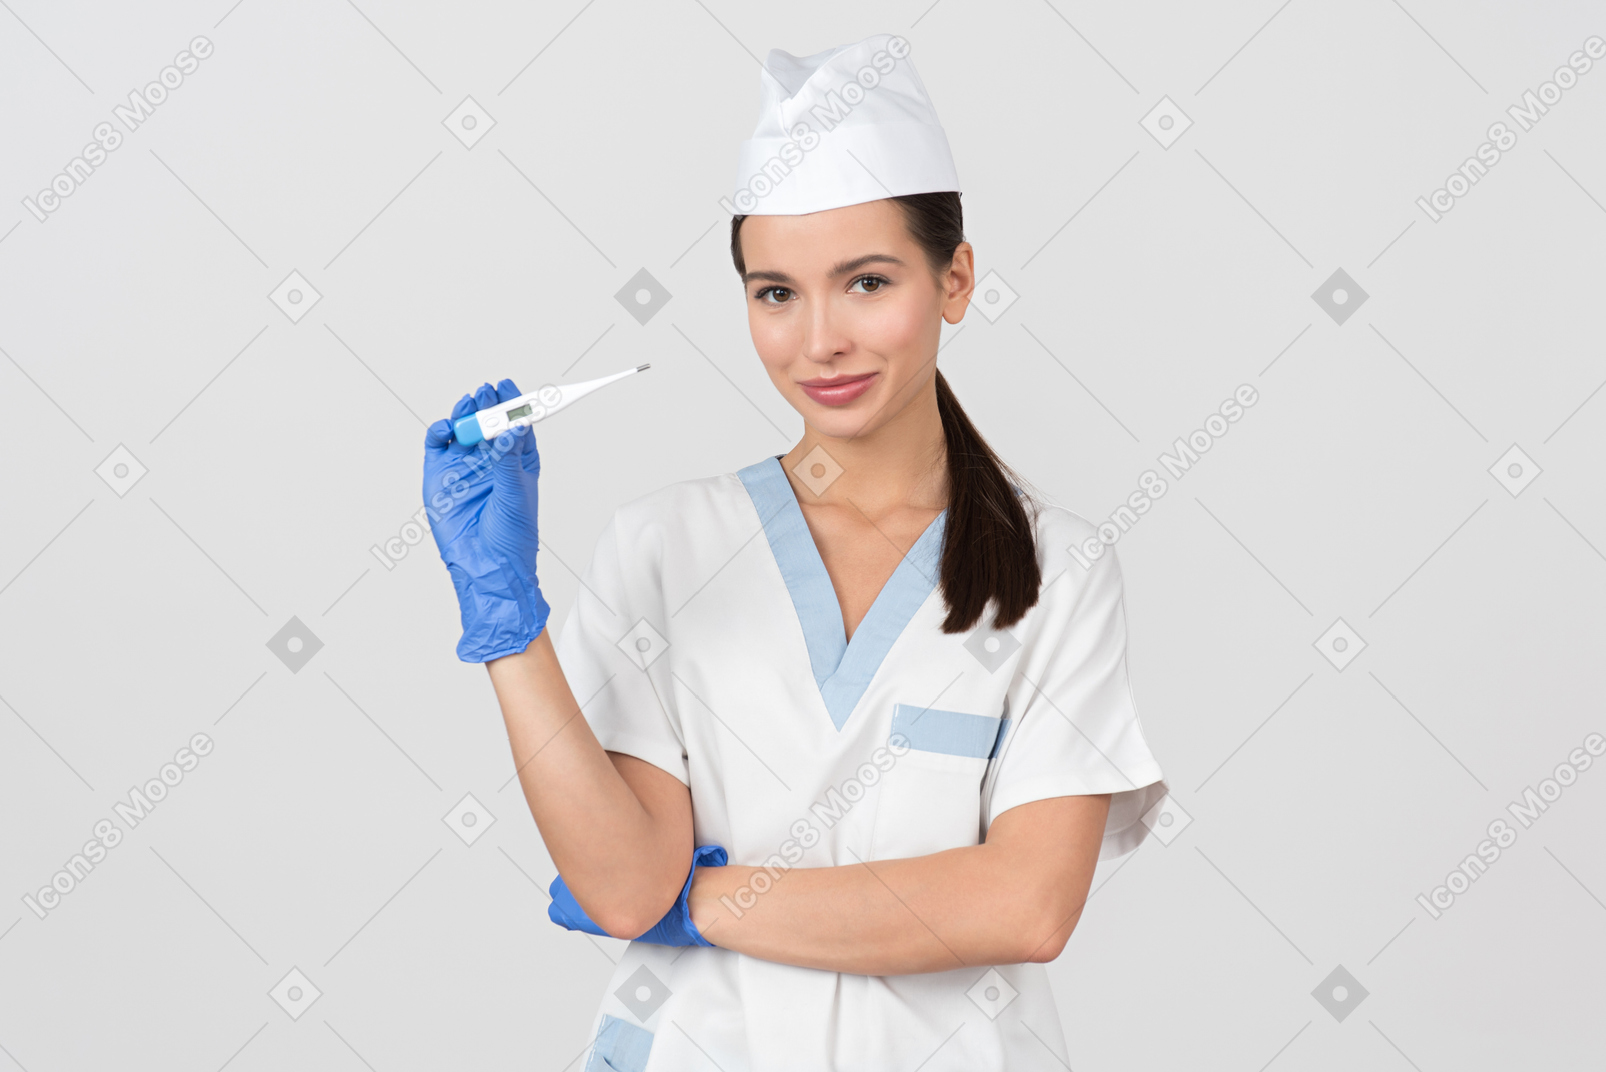 Attractive nurse showing a digital thermometer